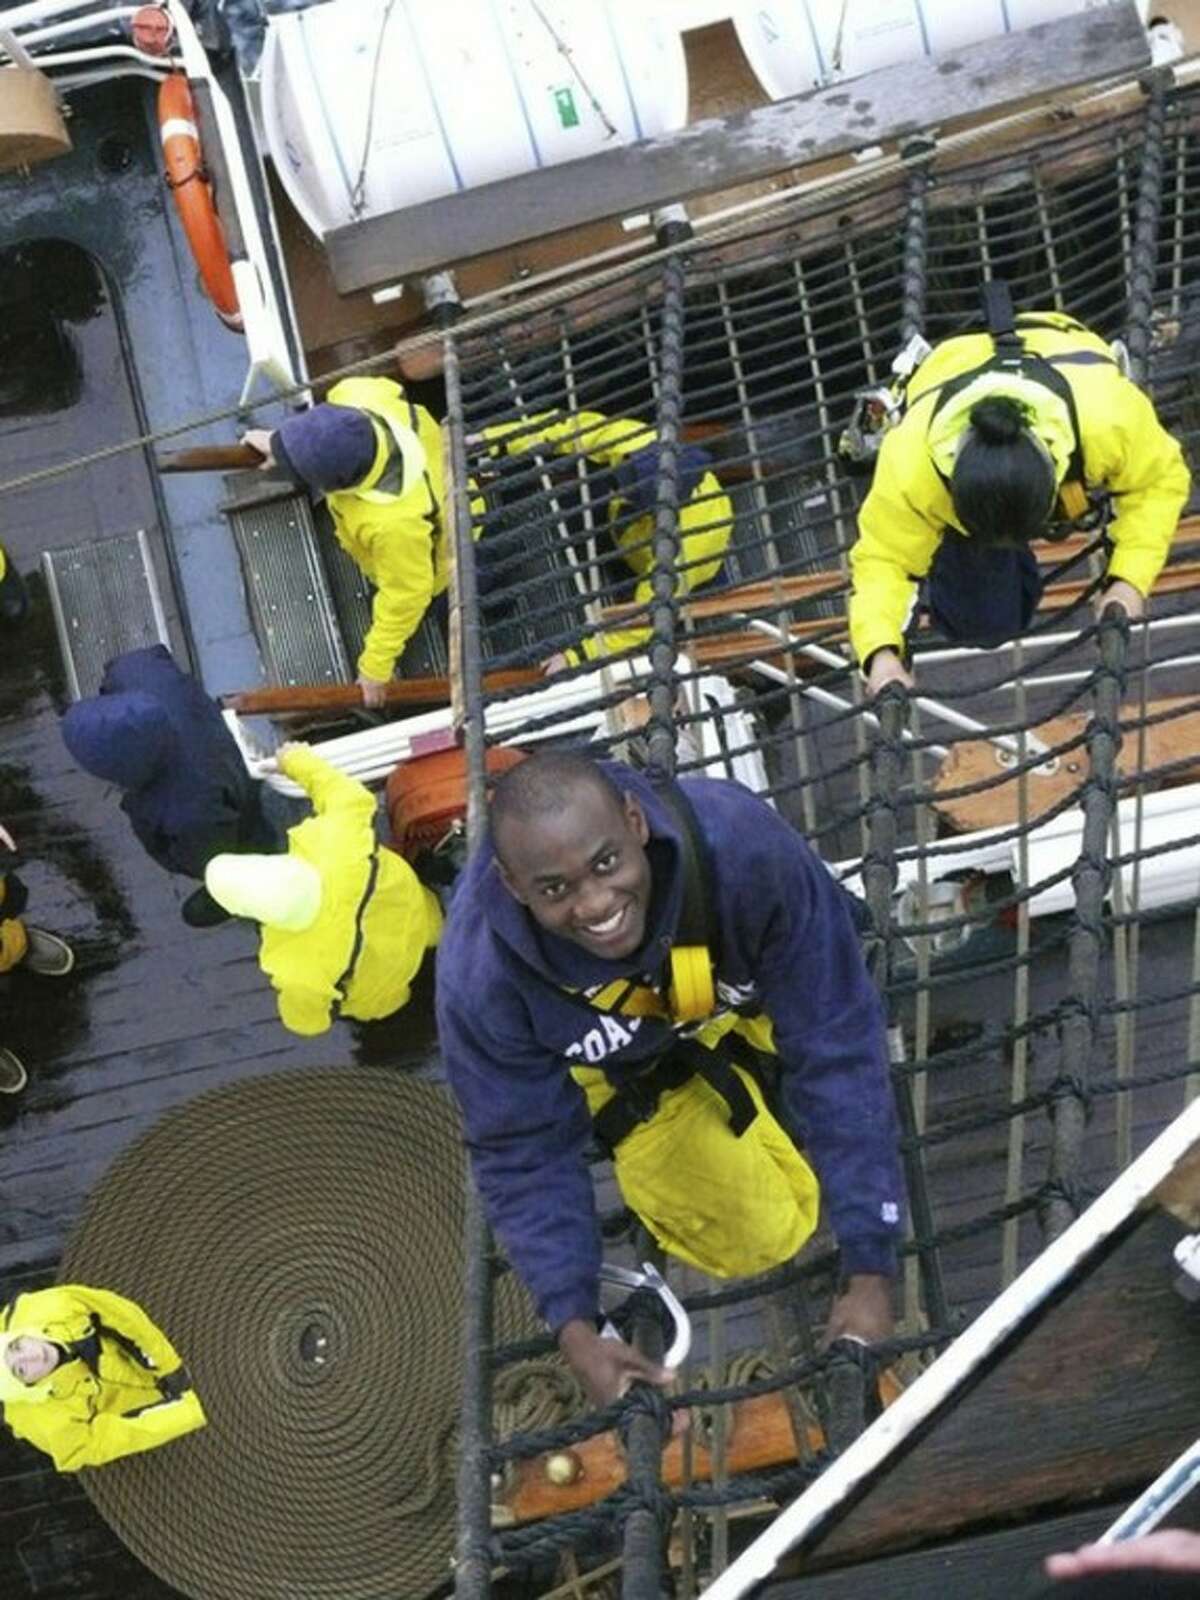 In this May 25, 2011 photo provided by the U.S. Coast Guard, U.S. Coast guard Academy, 1st Class, Cadet Orlando Morel climbs rigging aboard the Coast Guard Cutter Eagle. Morel was 6 years old when he and his mother were rescued by the Coast Guard while leaving Haiti. Morel, now of Rockville, Md., will graduate Wednesday, May 16, 2012, from the Coast Guard Academy in New London, Conn. (AP Photo/U.S. Coast Guard Academy)